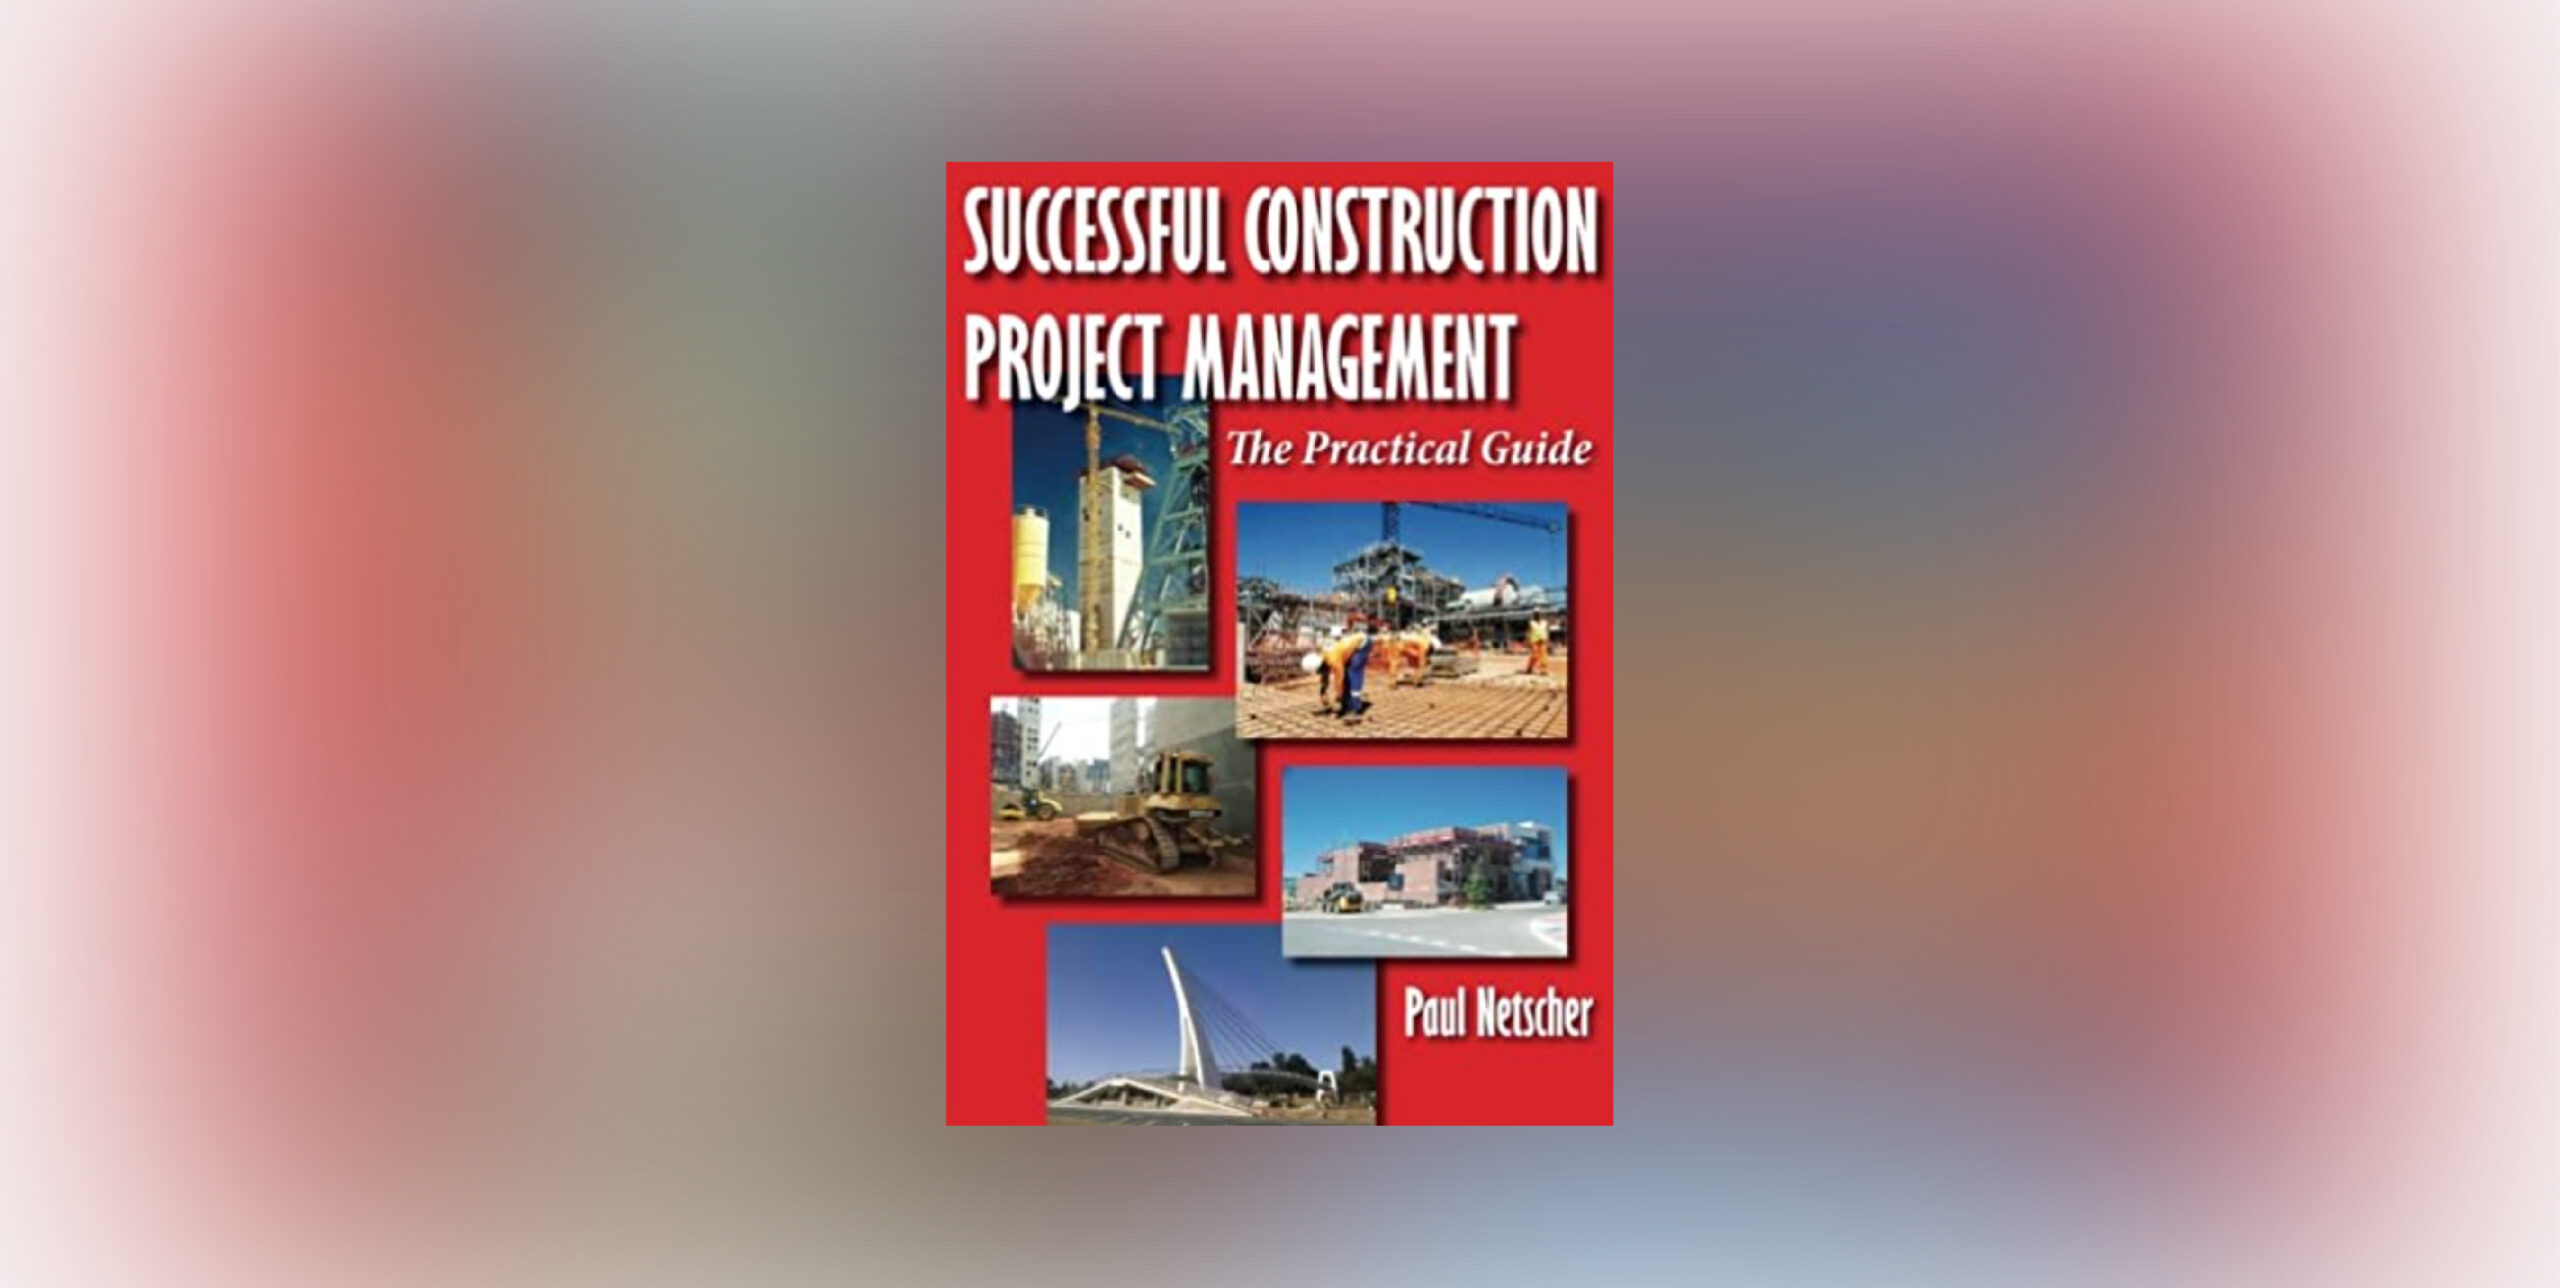 Successful project completion book on red background